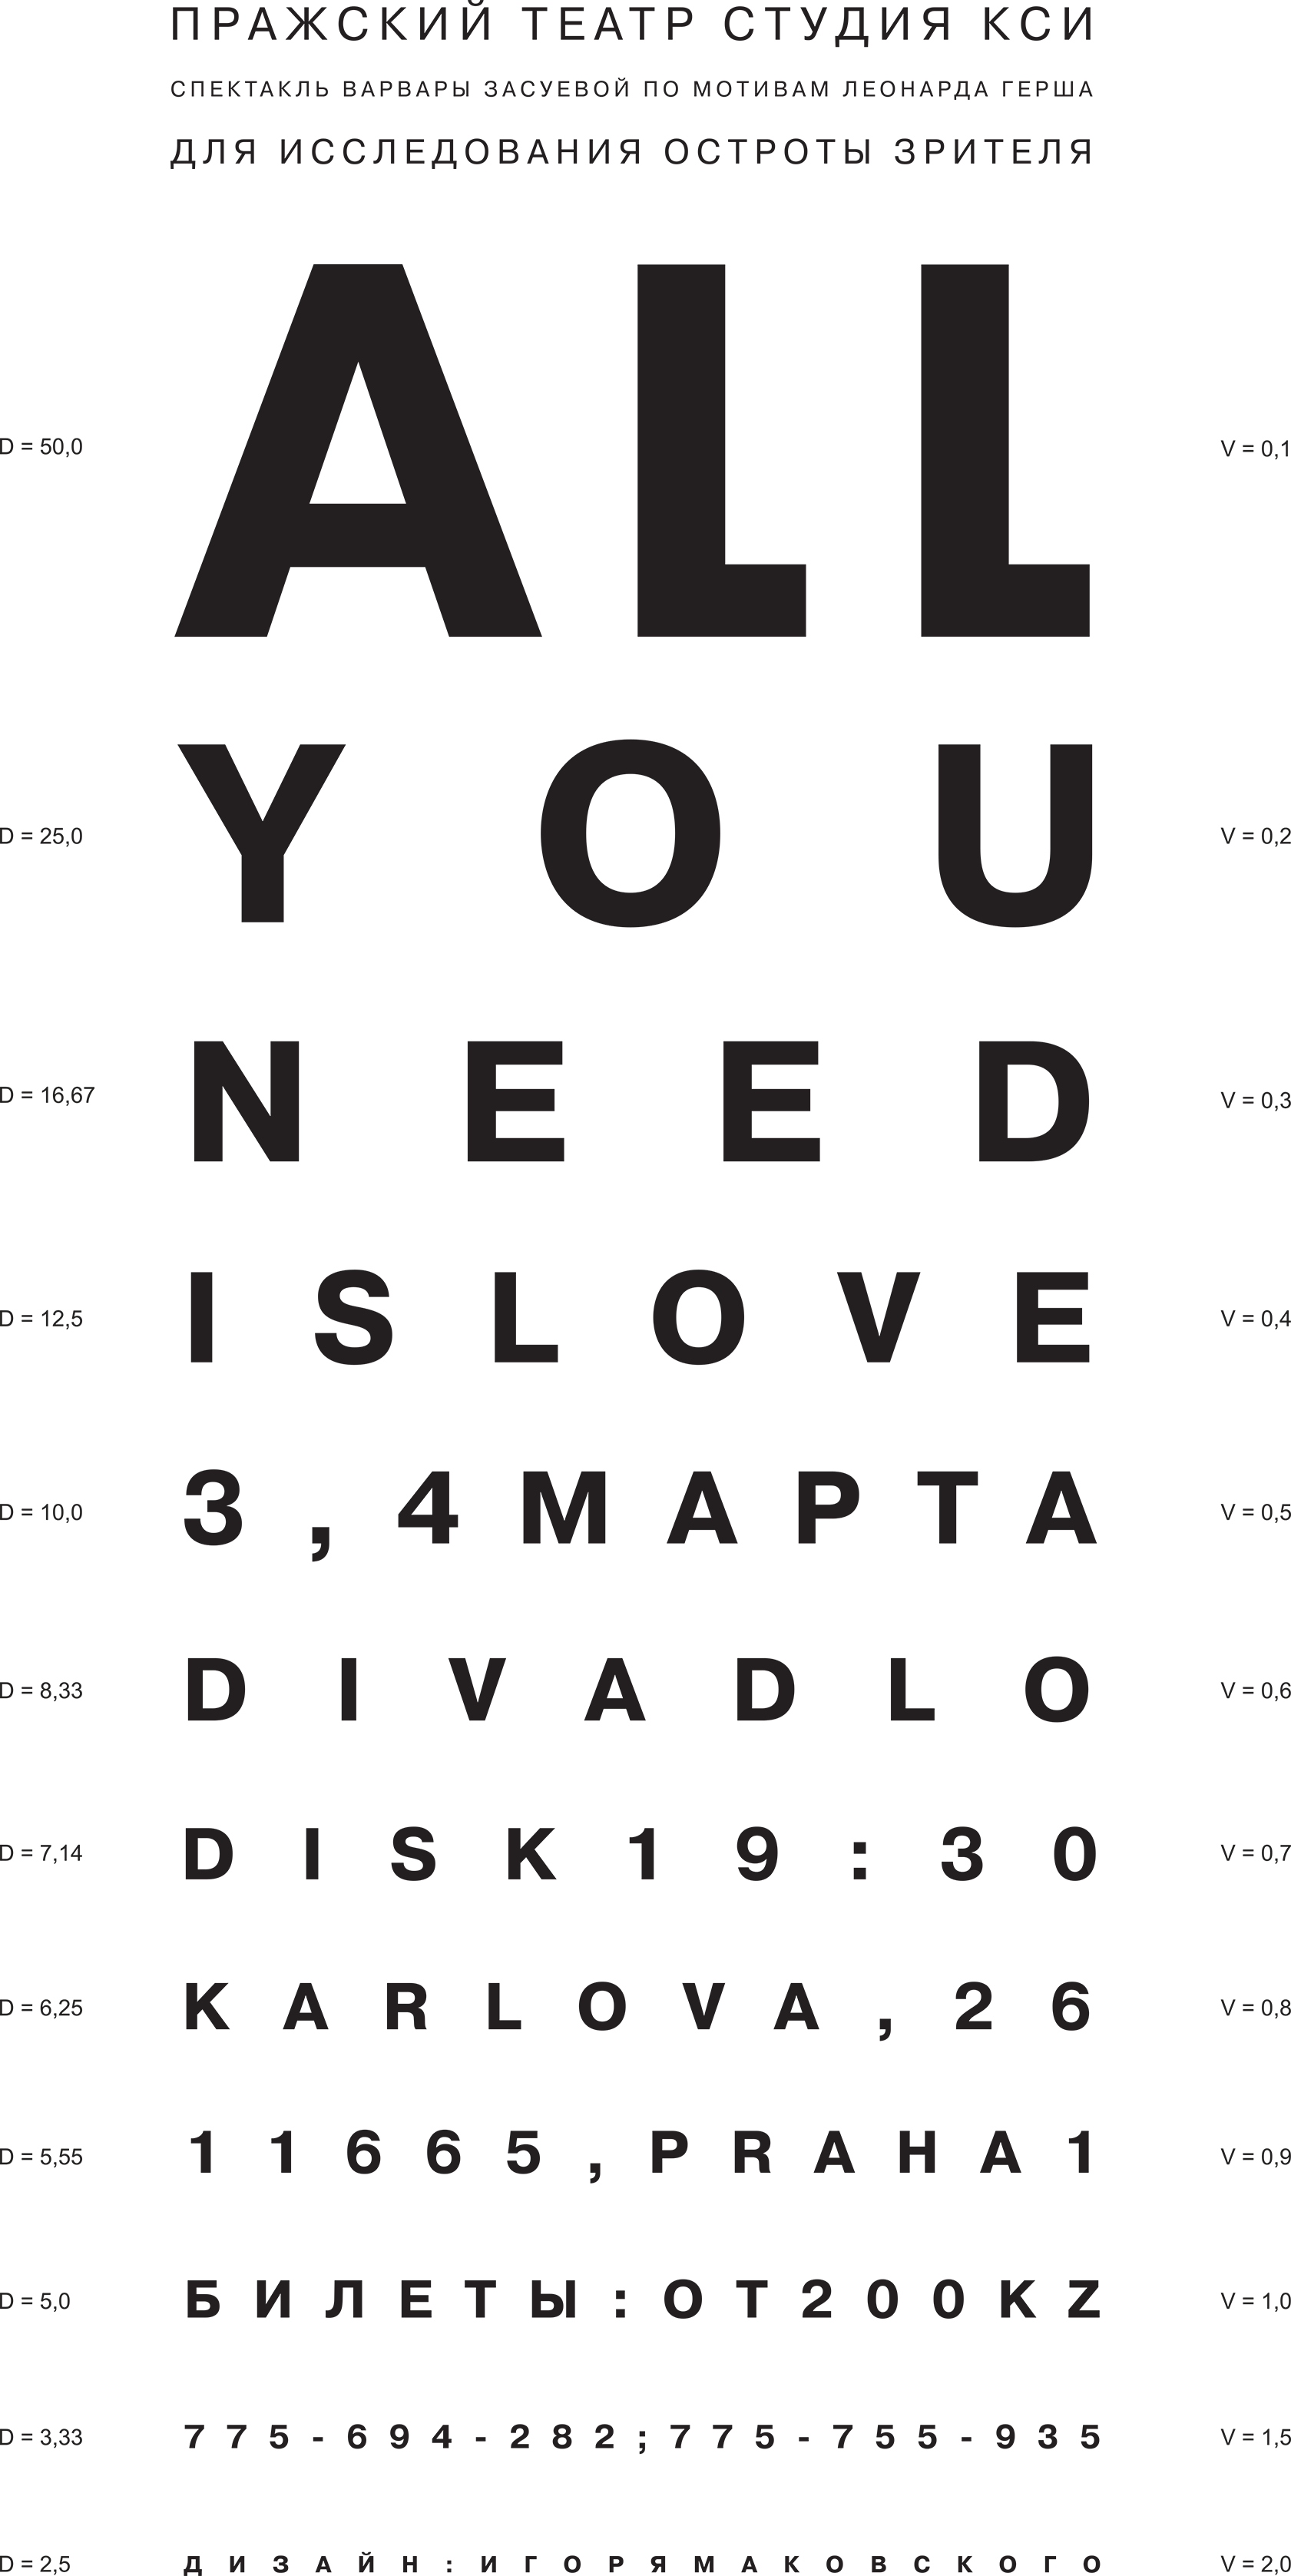 all you need is love typographics from the poster